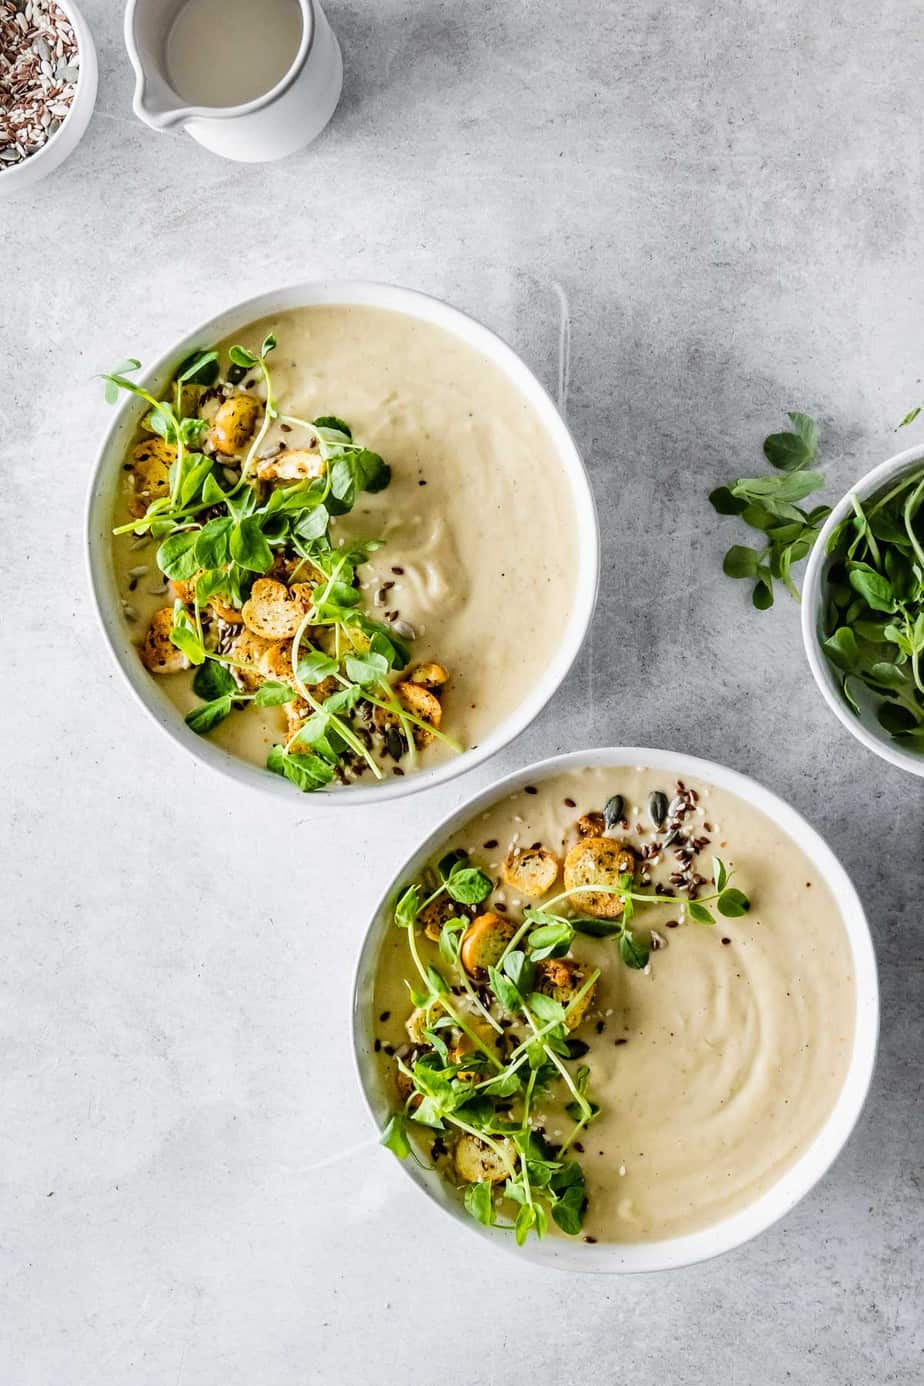 Soup in white bowls garnished with seeds and pea shoots.